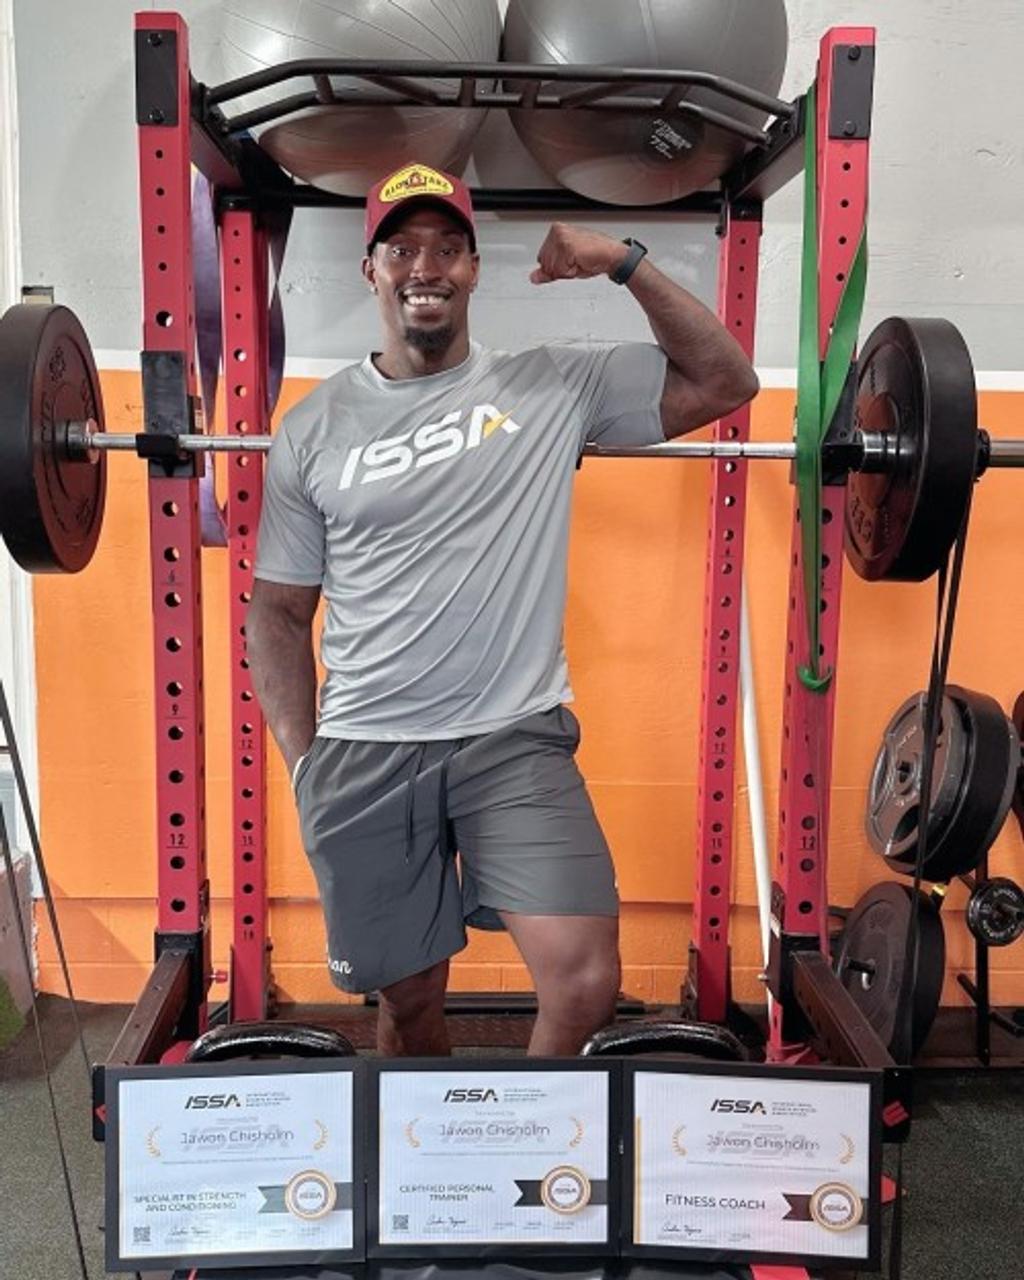 ISSA | Jawon Chisholm Overcomes Extreme Adversity, Inspires Fitness Success 2